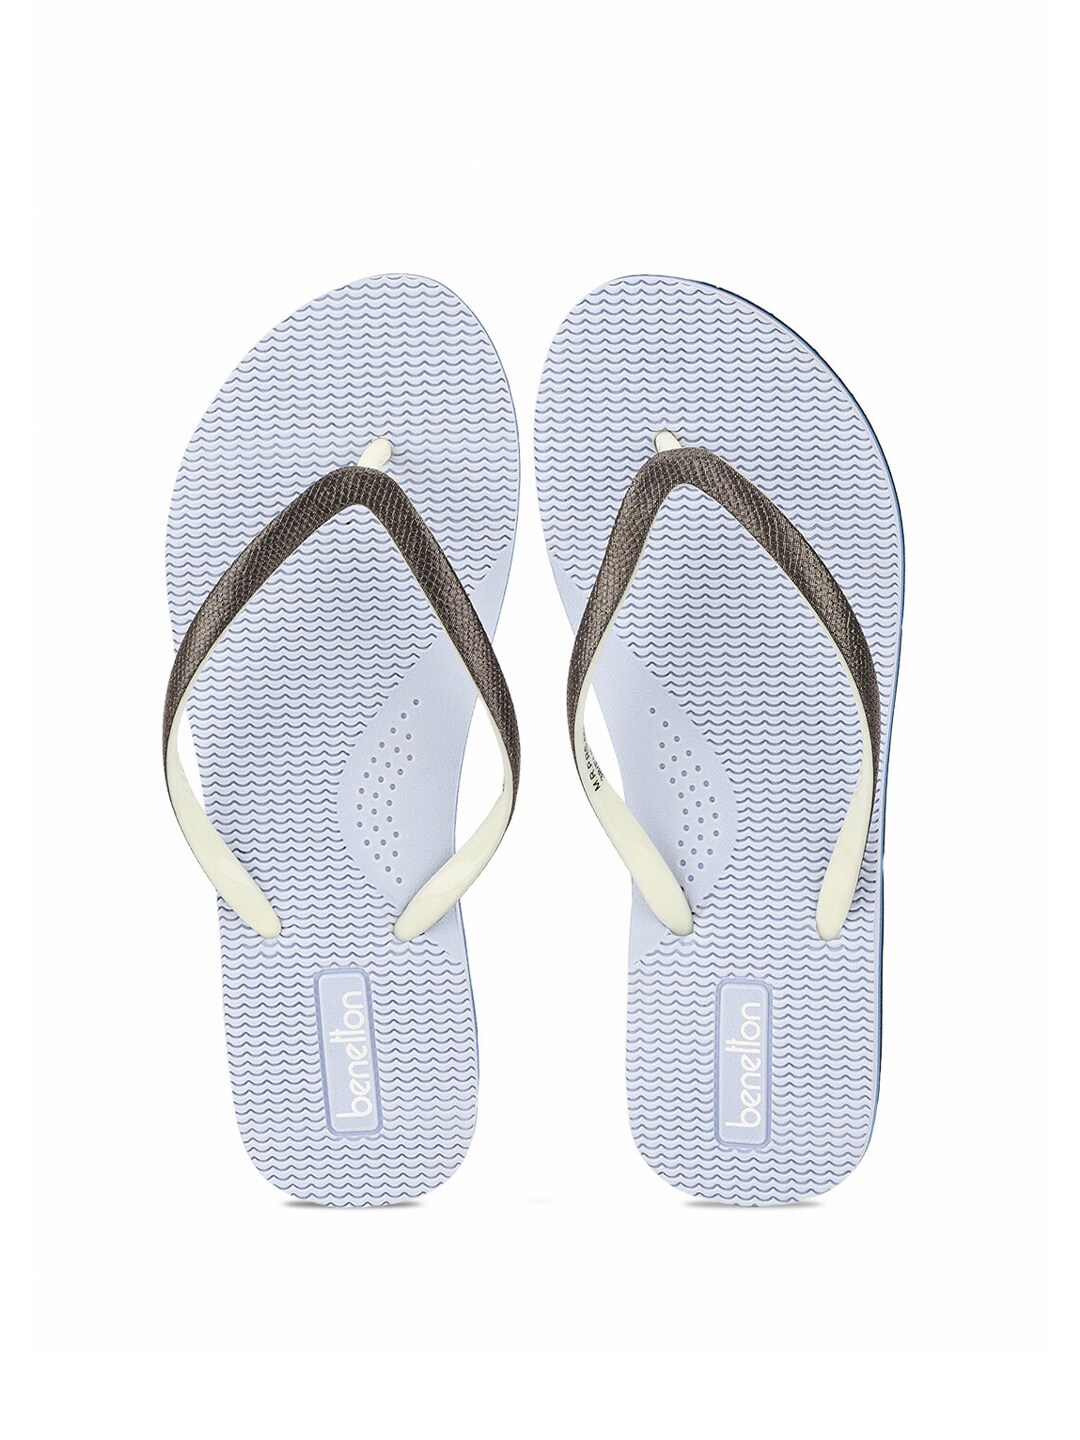 United Colors of Benetton Women Blue & Gold-Toned Rubber Thong Flip-Flops Price in India